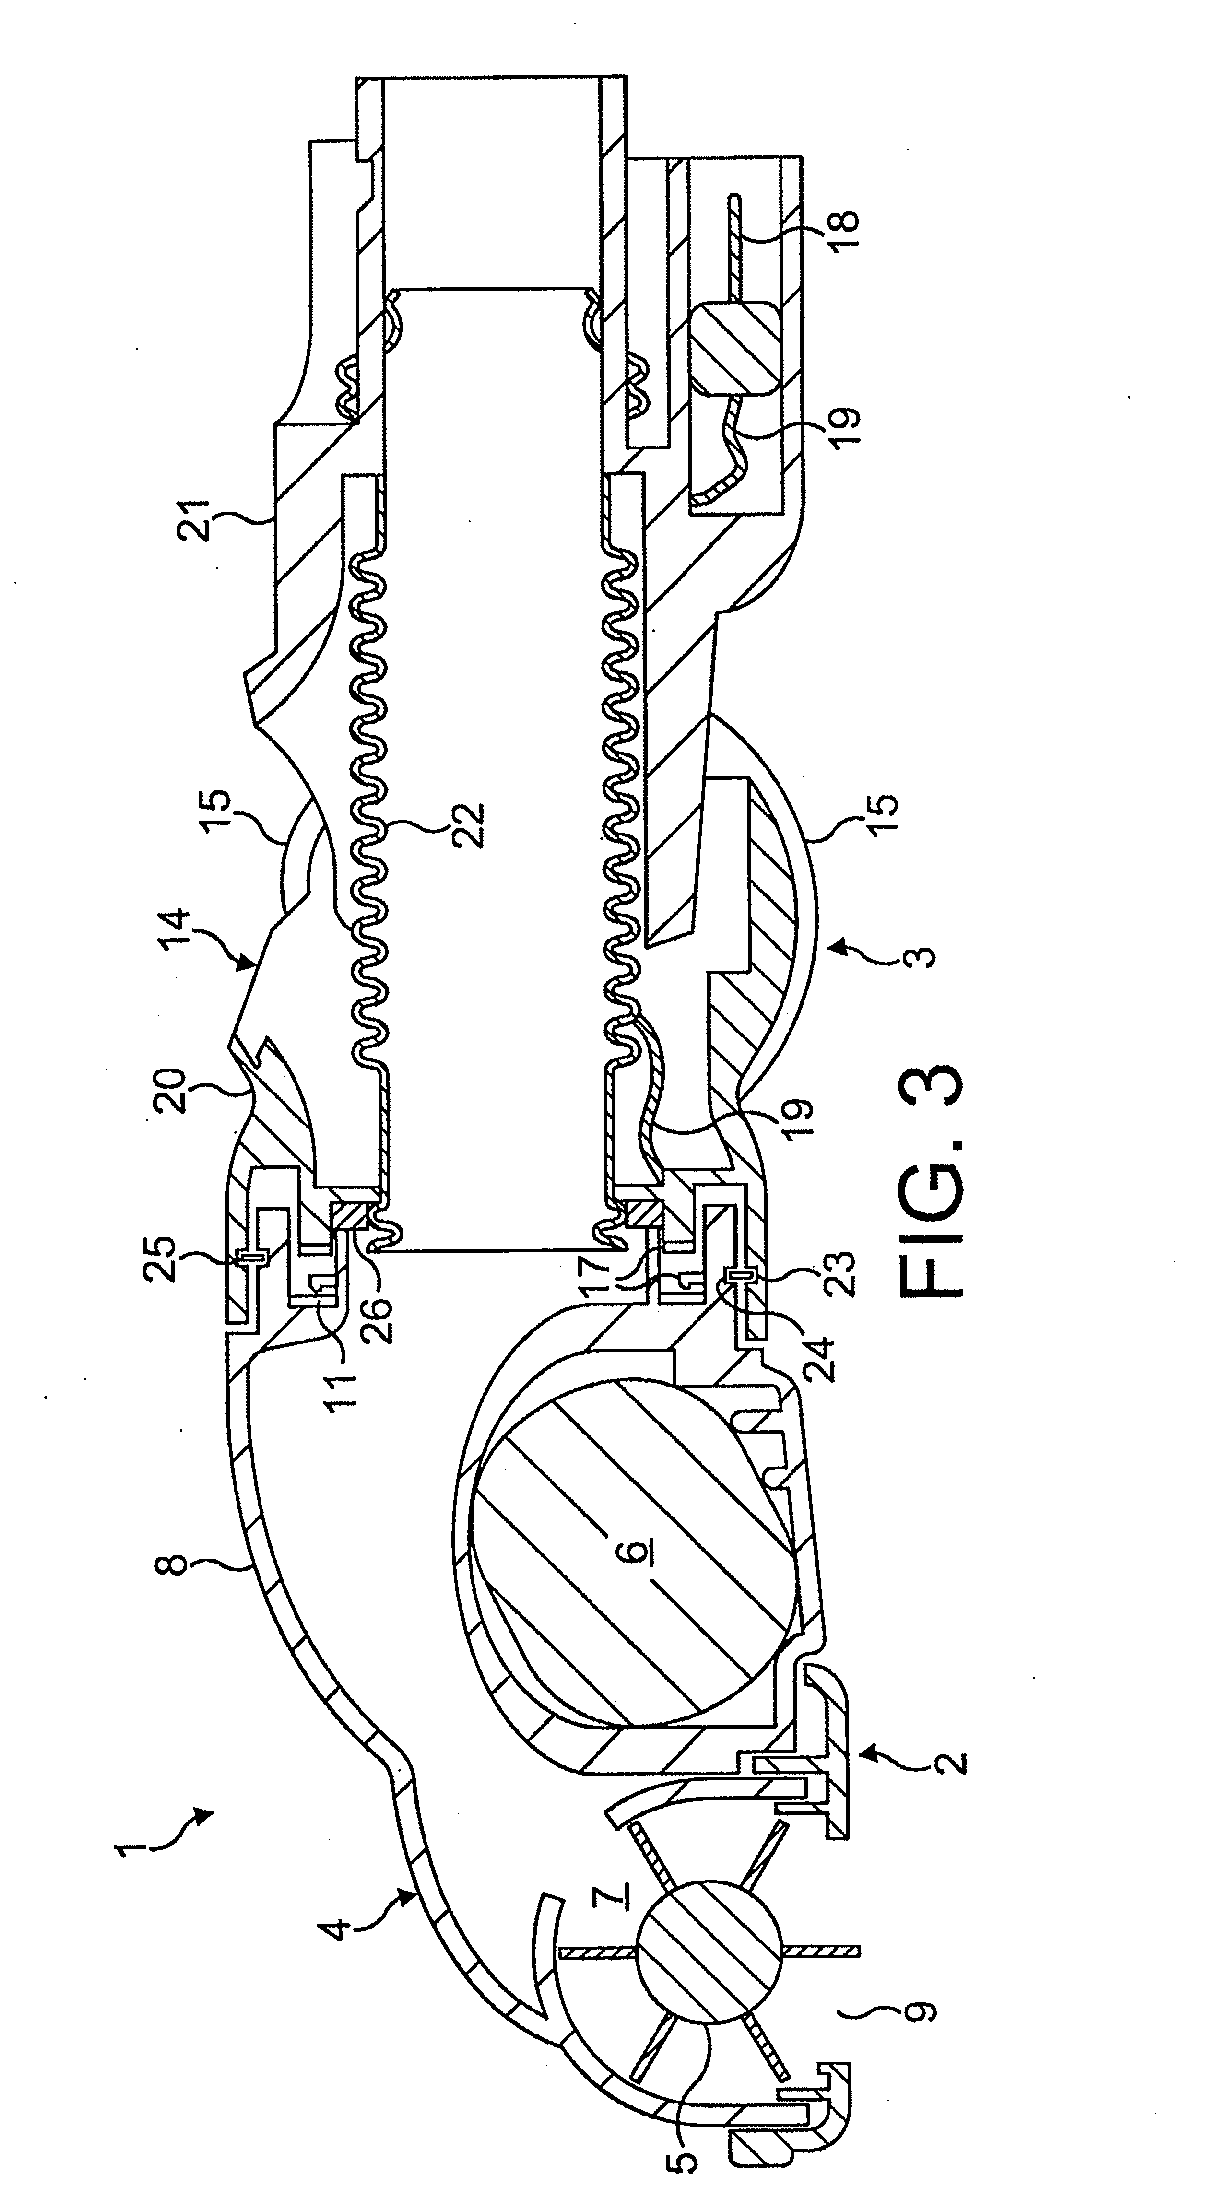 Floor tool for a cleaning appliance